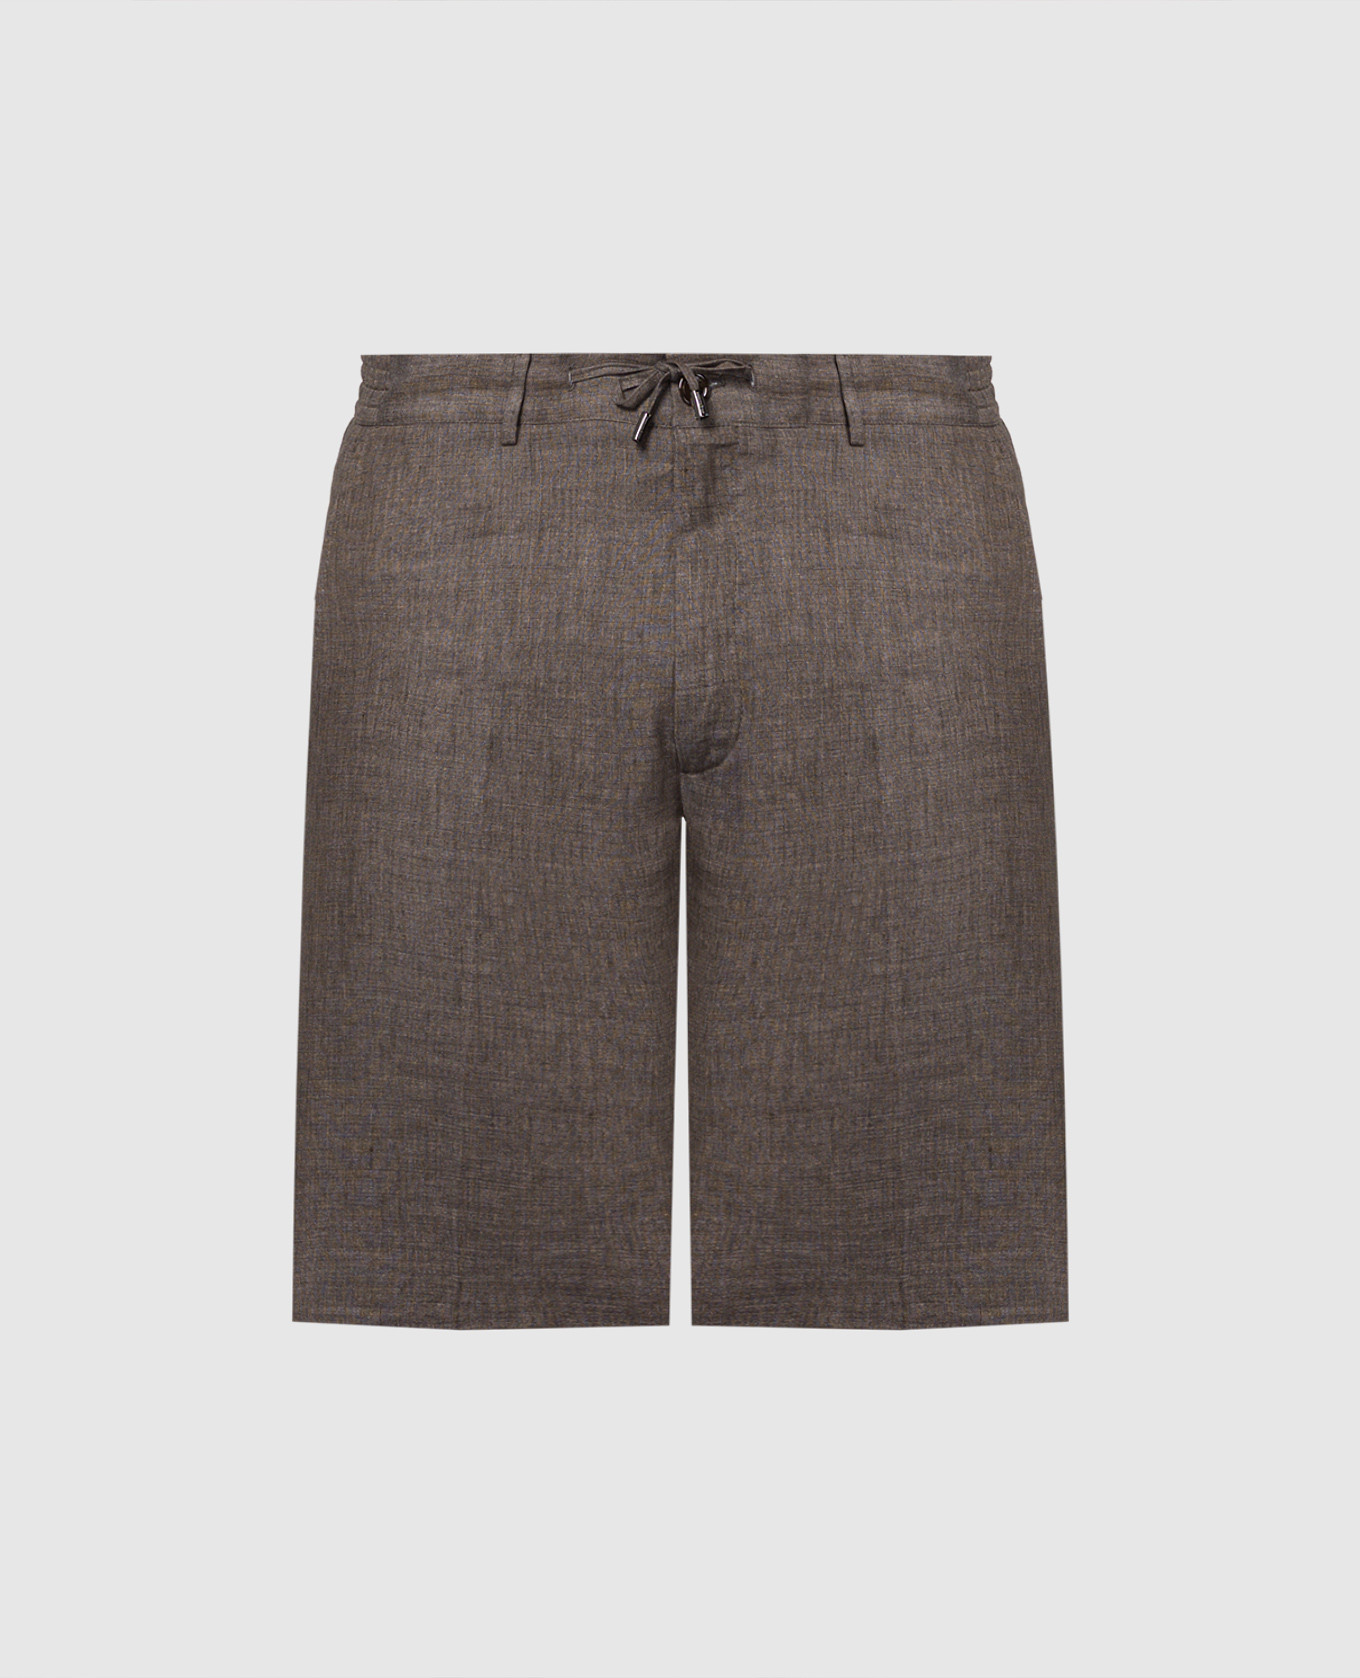 Brown linen shorts with logo